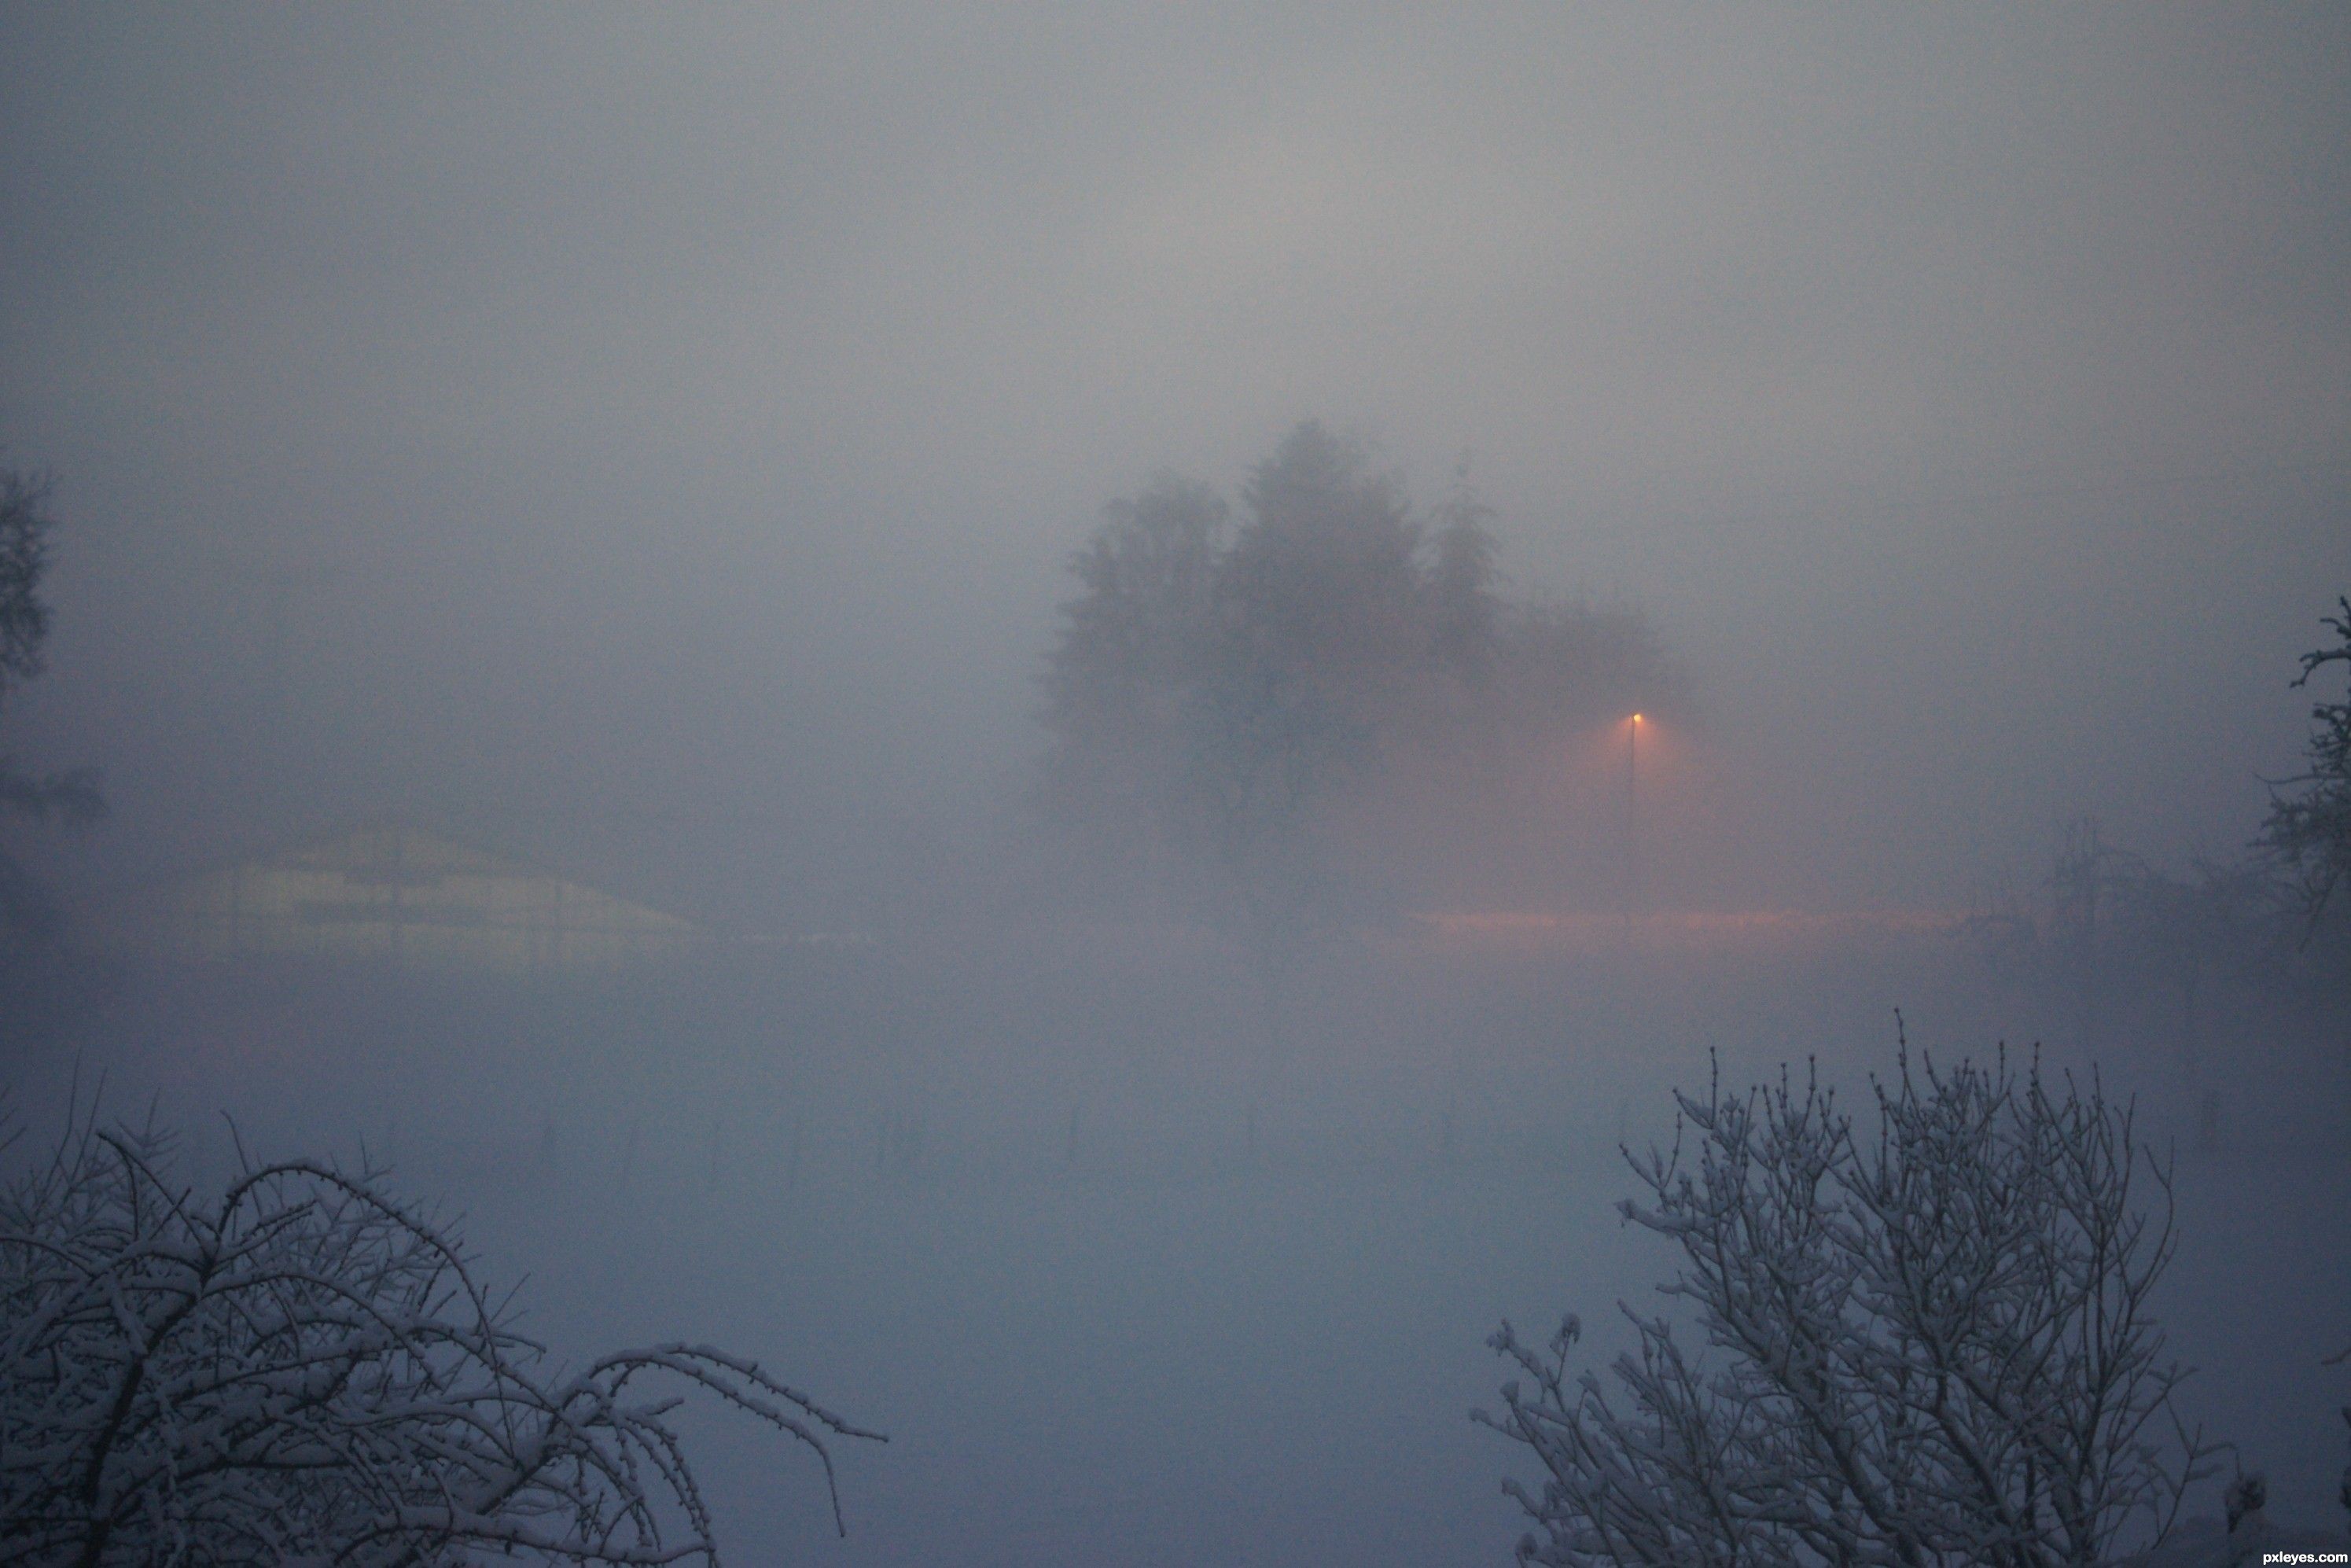 Good night winter! picture, by reydejupiter for: fog photography contest